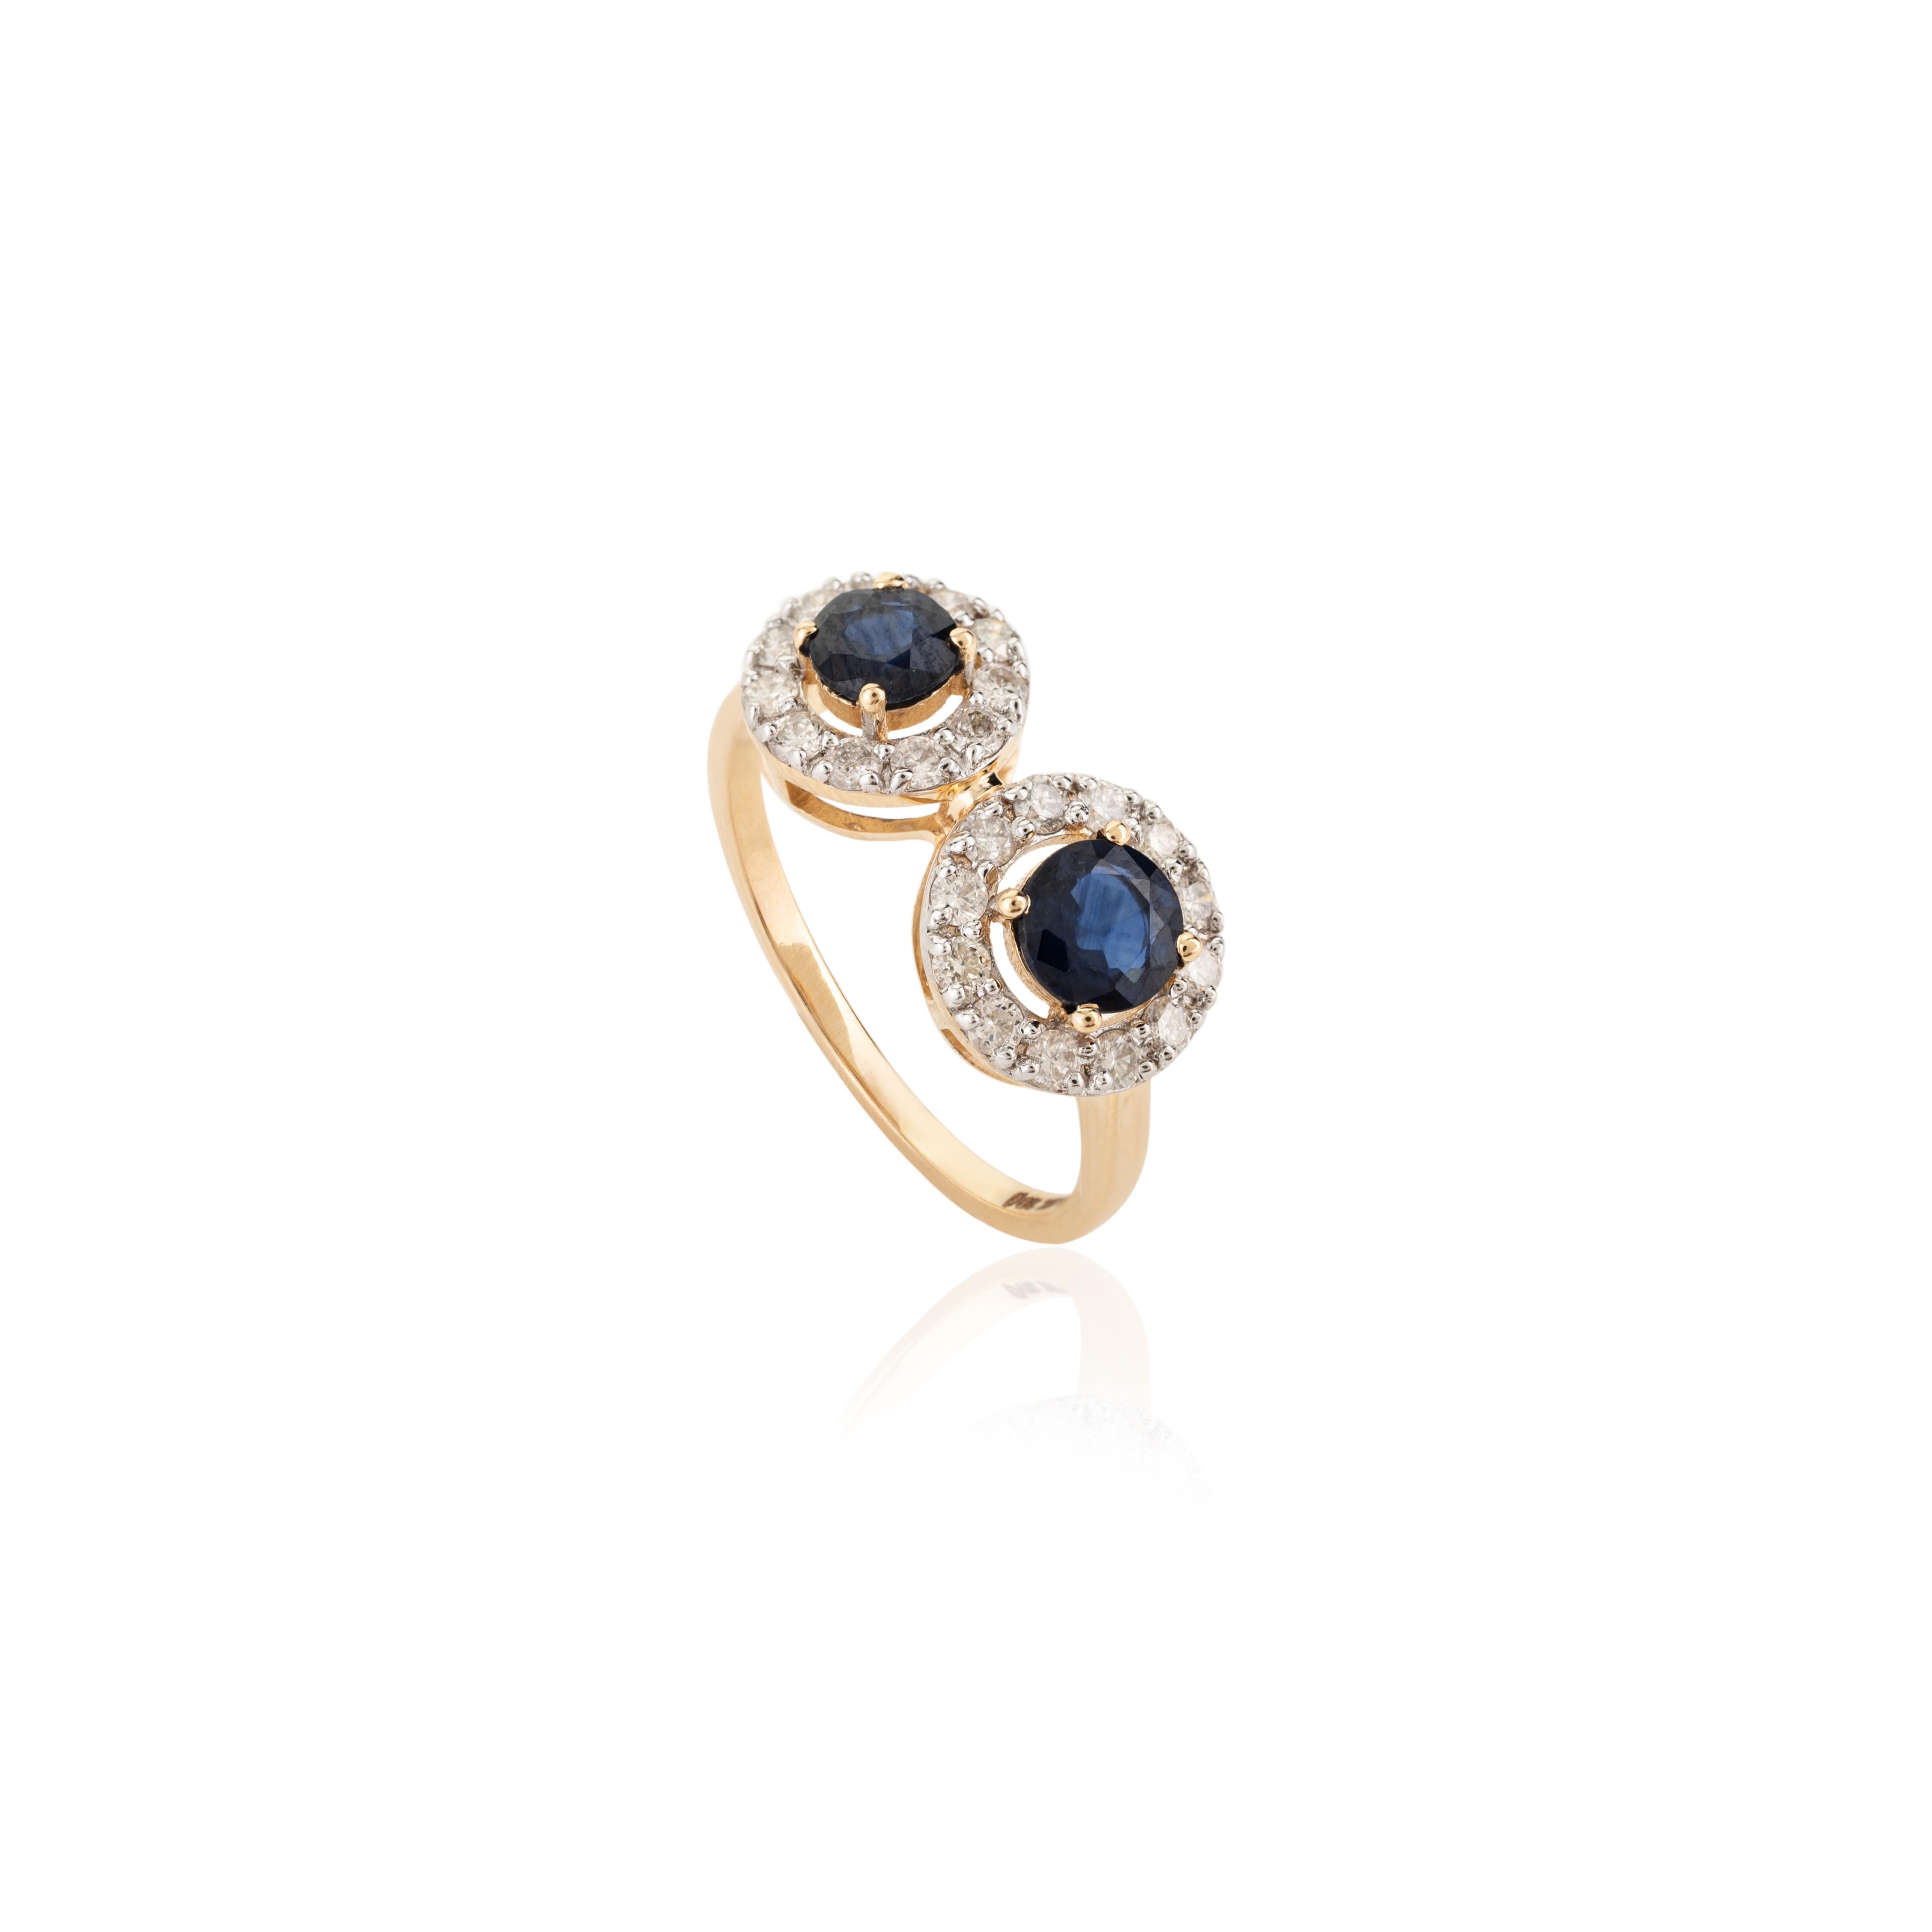 Im Angebot: Classic Two Blue Sapphire Diamond Halo Ring 18k Solid Gelbgold () 8